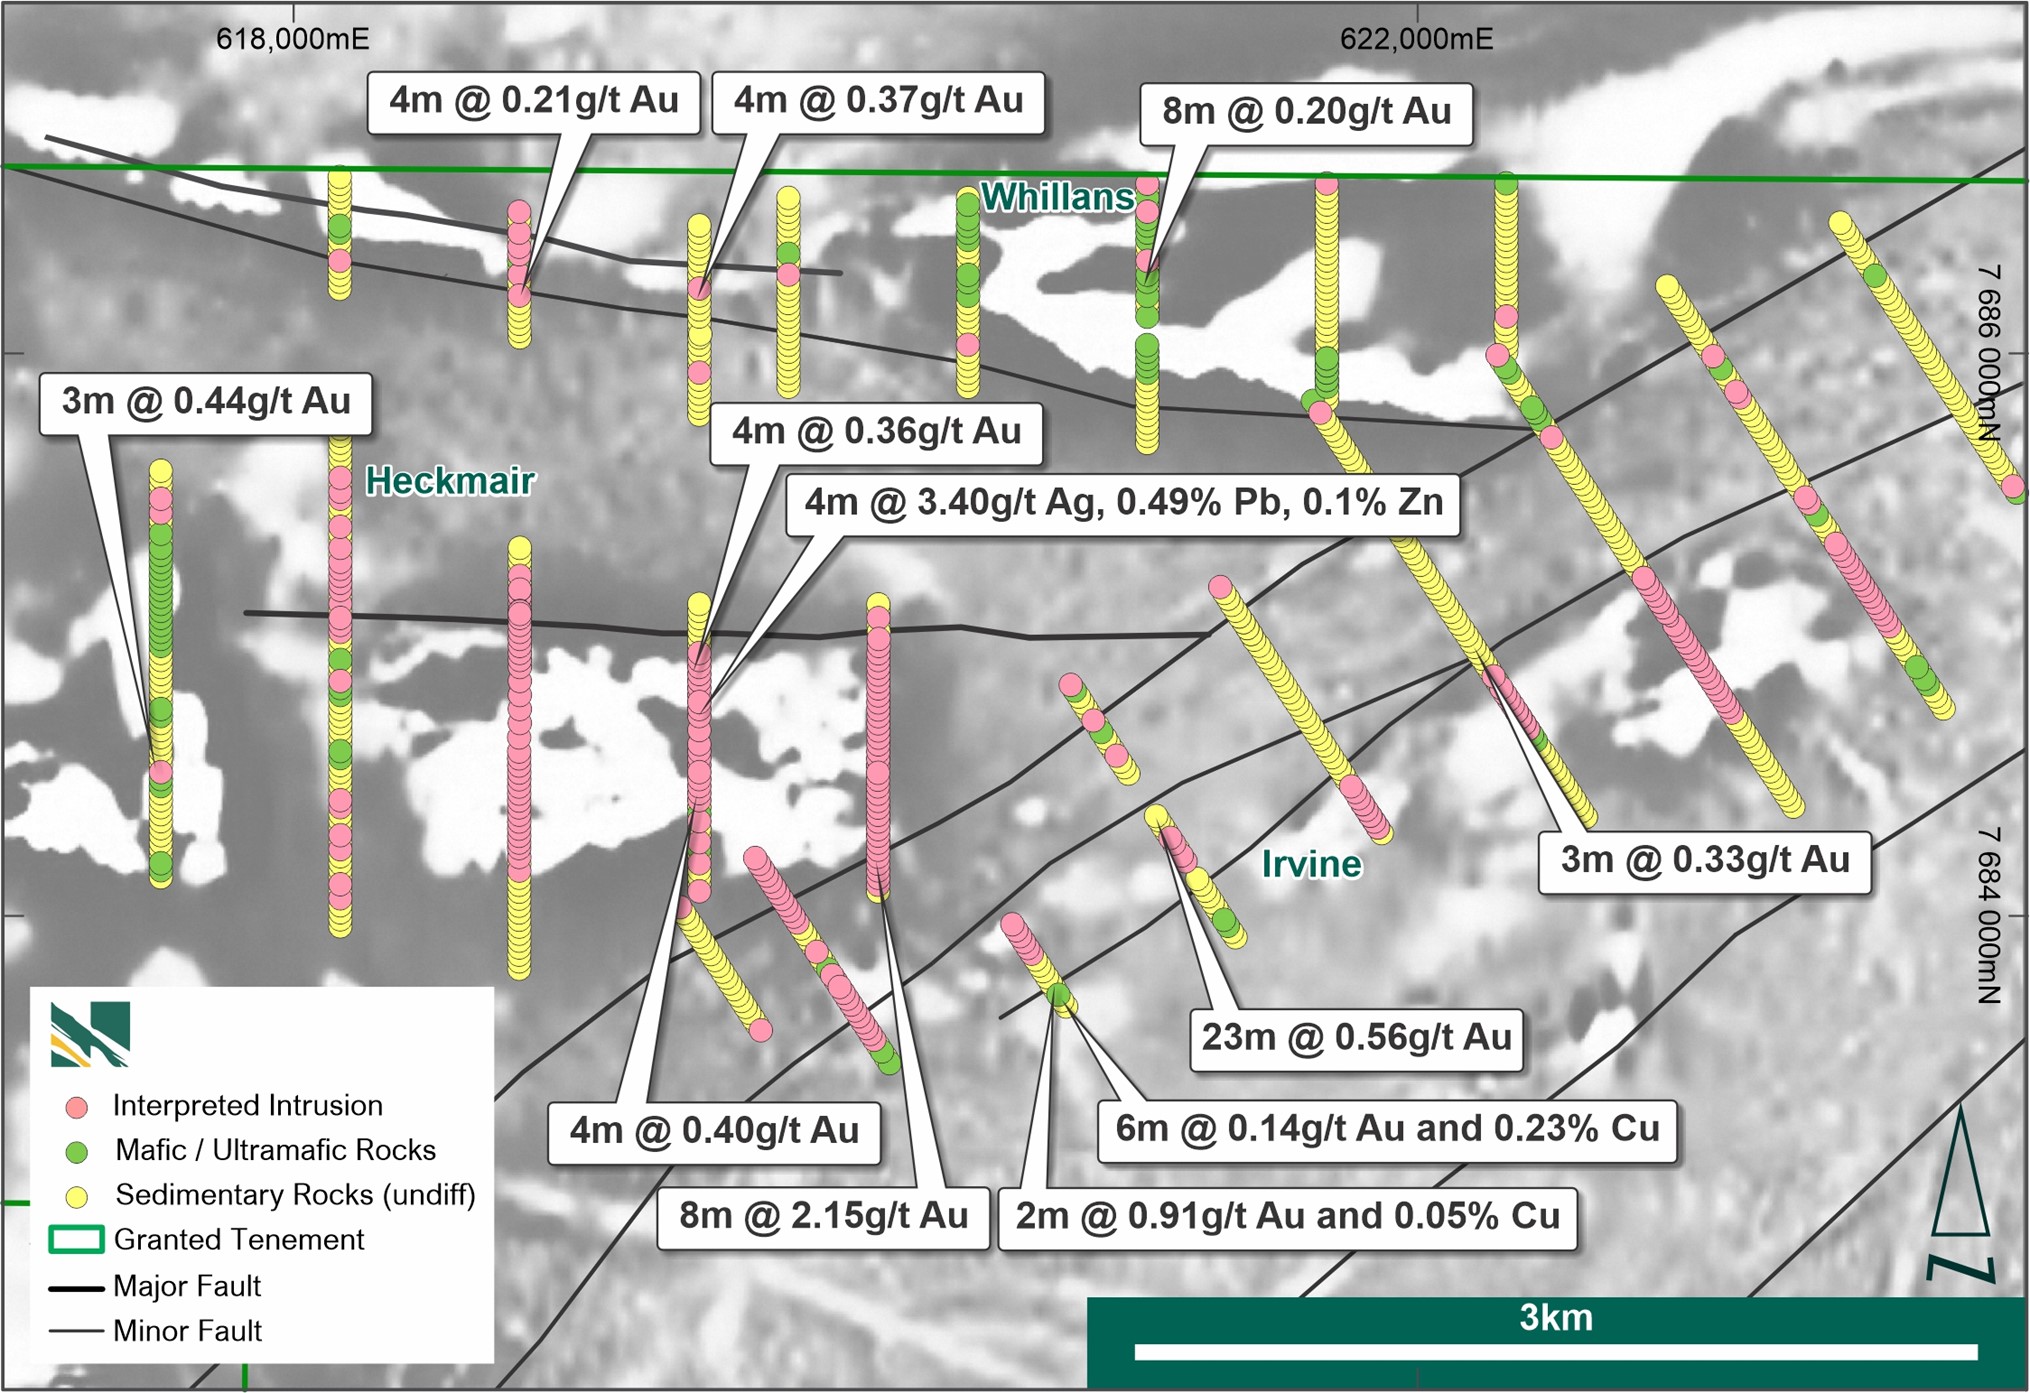 Becher target area showing rock types interpreted from multielement analysis of end-of-hole samples in AC drilling over 1VD high resolution aeromagnetics.